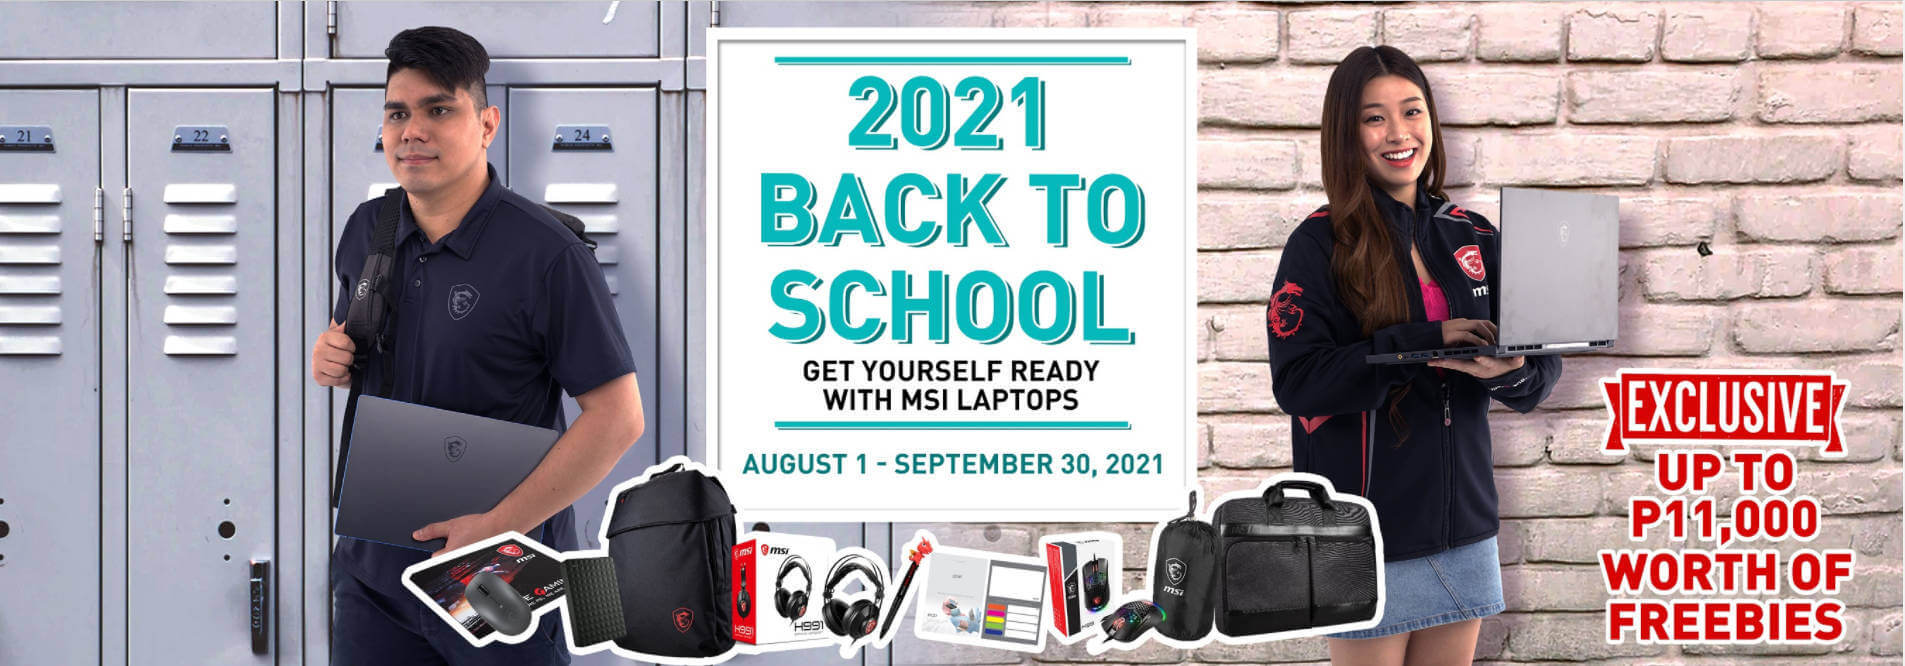 Gear Up with the MSI 2021 Back to School Promo